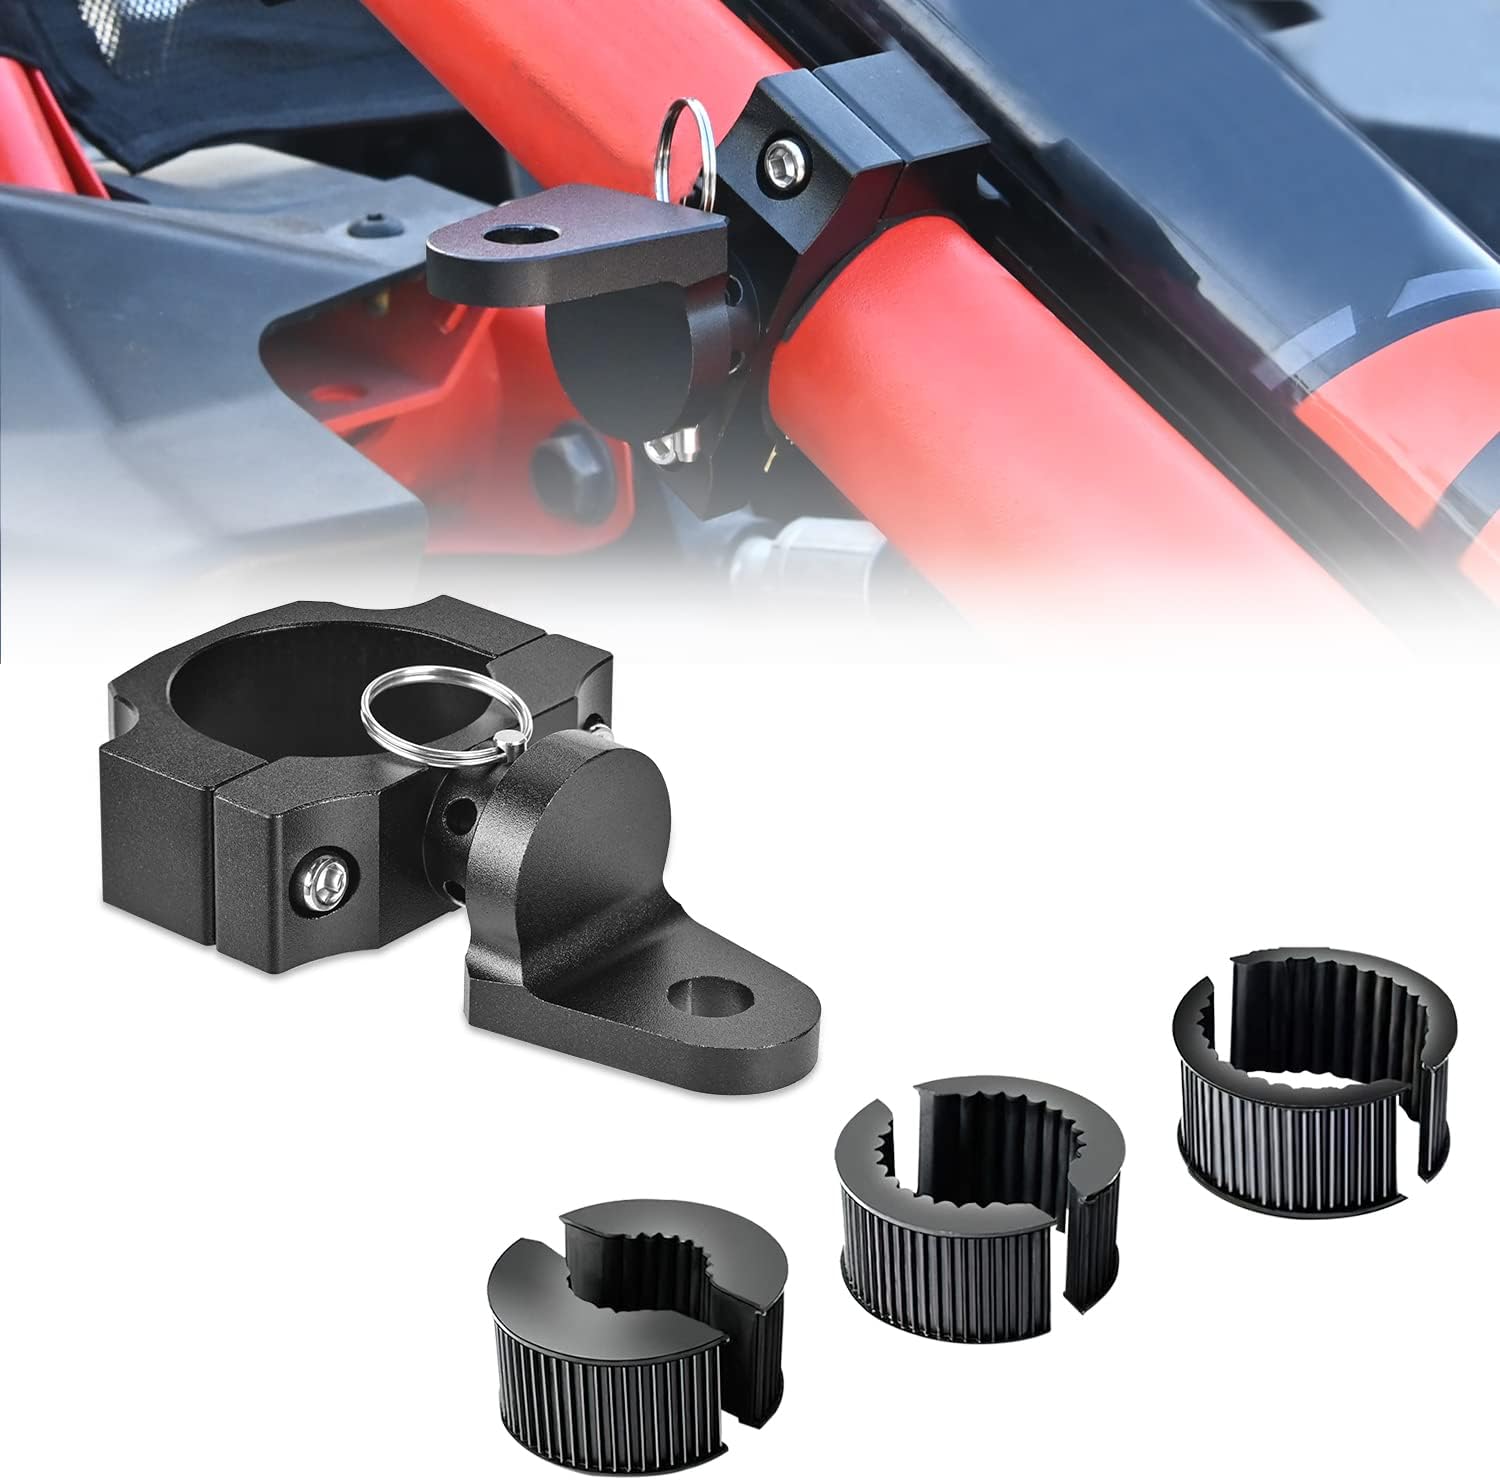 UTV Whip Mount 360°Adjustable Flag Mount Aluminum Bracket with 3 Sizes Rubber Inserts for 1"-2" Roll Bar Compatible with Polaris RZR Can-Am Commander Kawasaki Talon